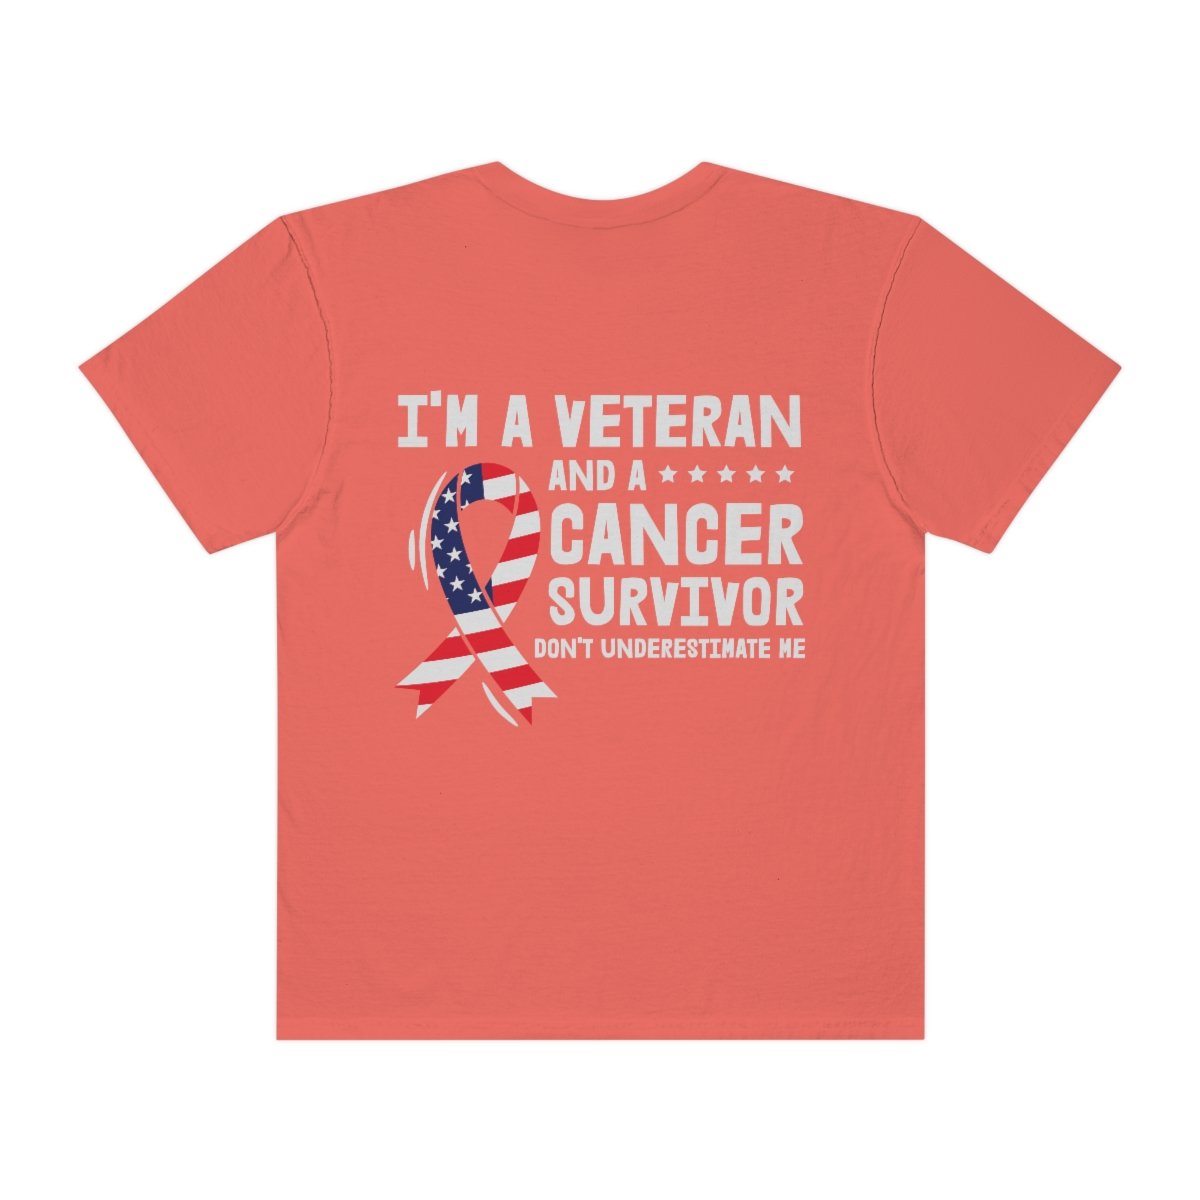 I'm A Veteran and a Cancer Survivor Don't Underestimate Me - Unisex - Garment-Dyed - Dark Colors - T-shirt